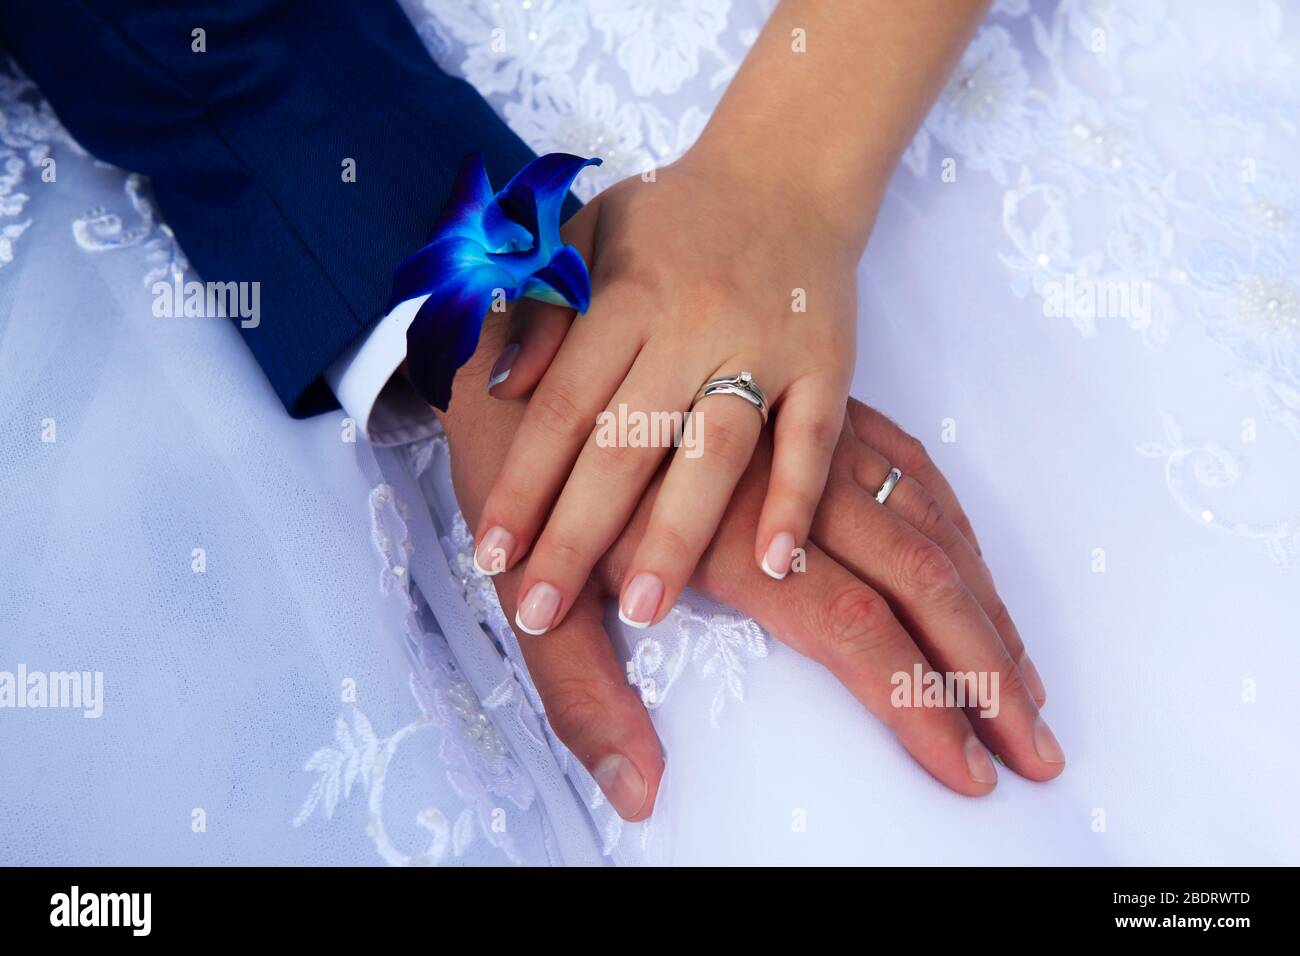 Hands of the bride and groom on the background of a wedding dress. Stock Photo